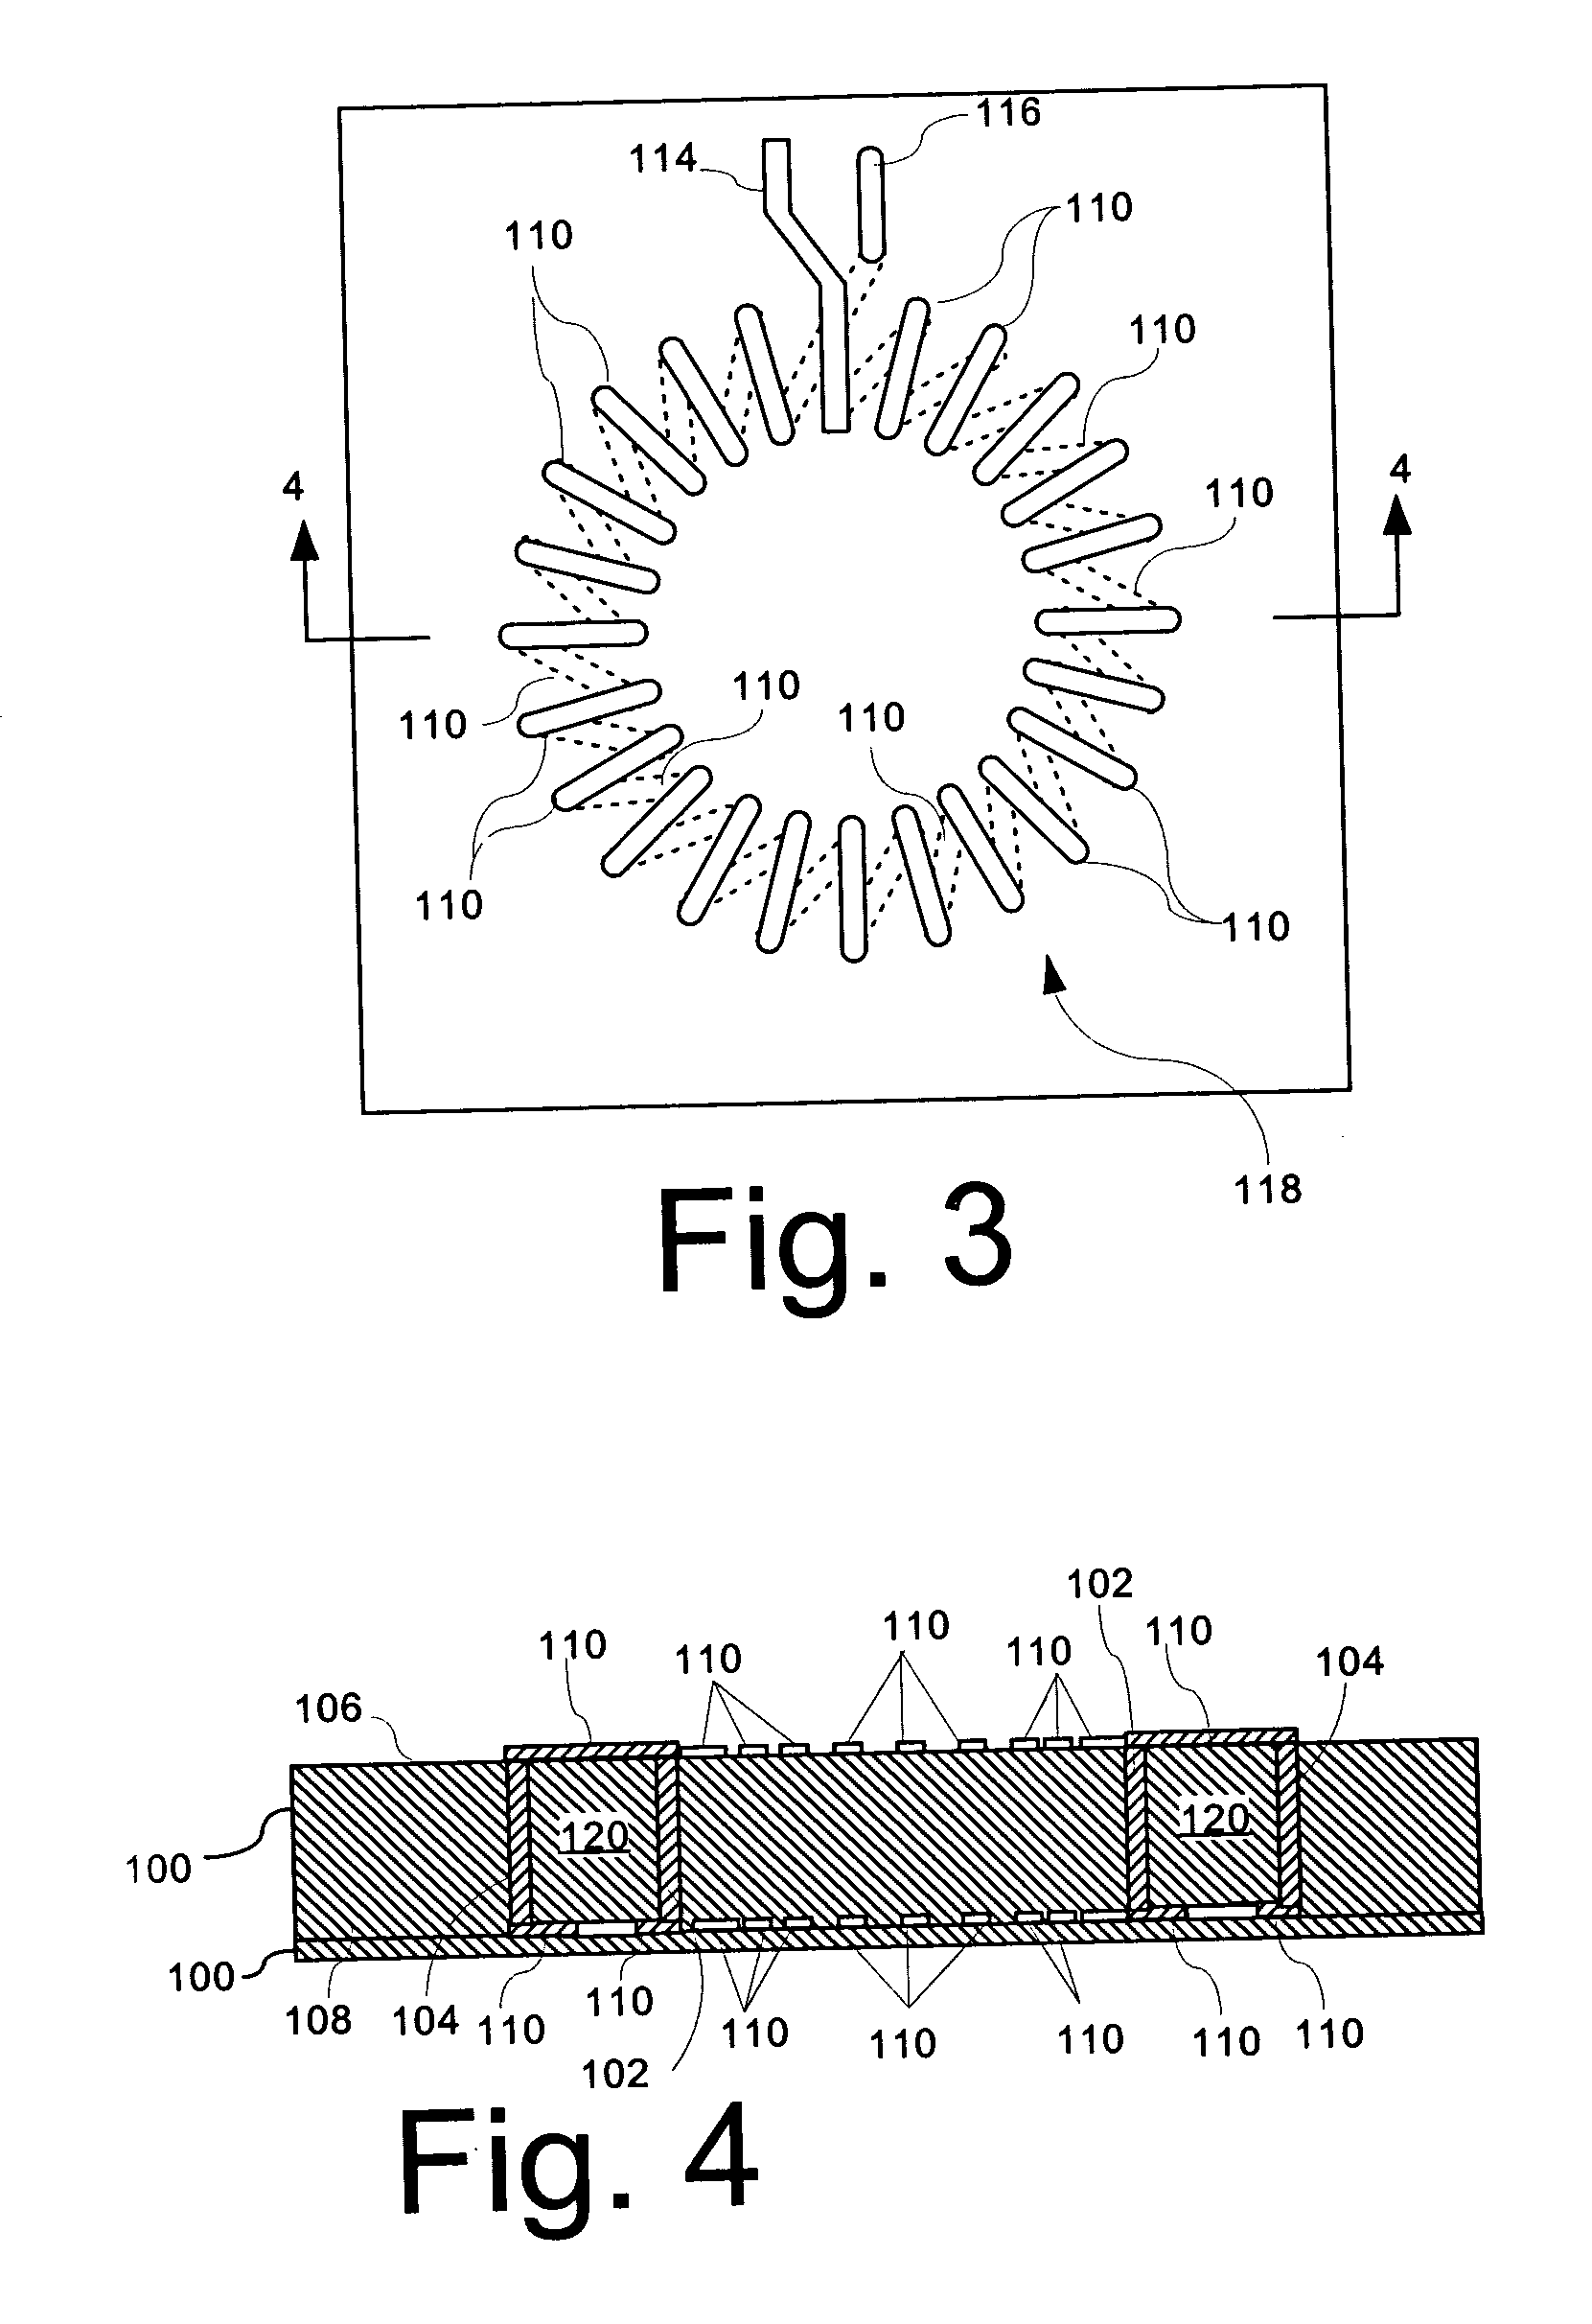 Embedded toroidal inductors